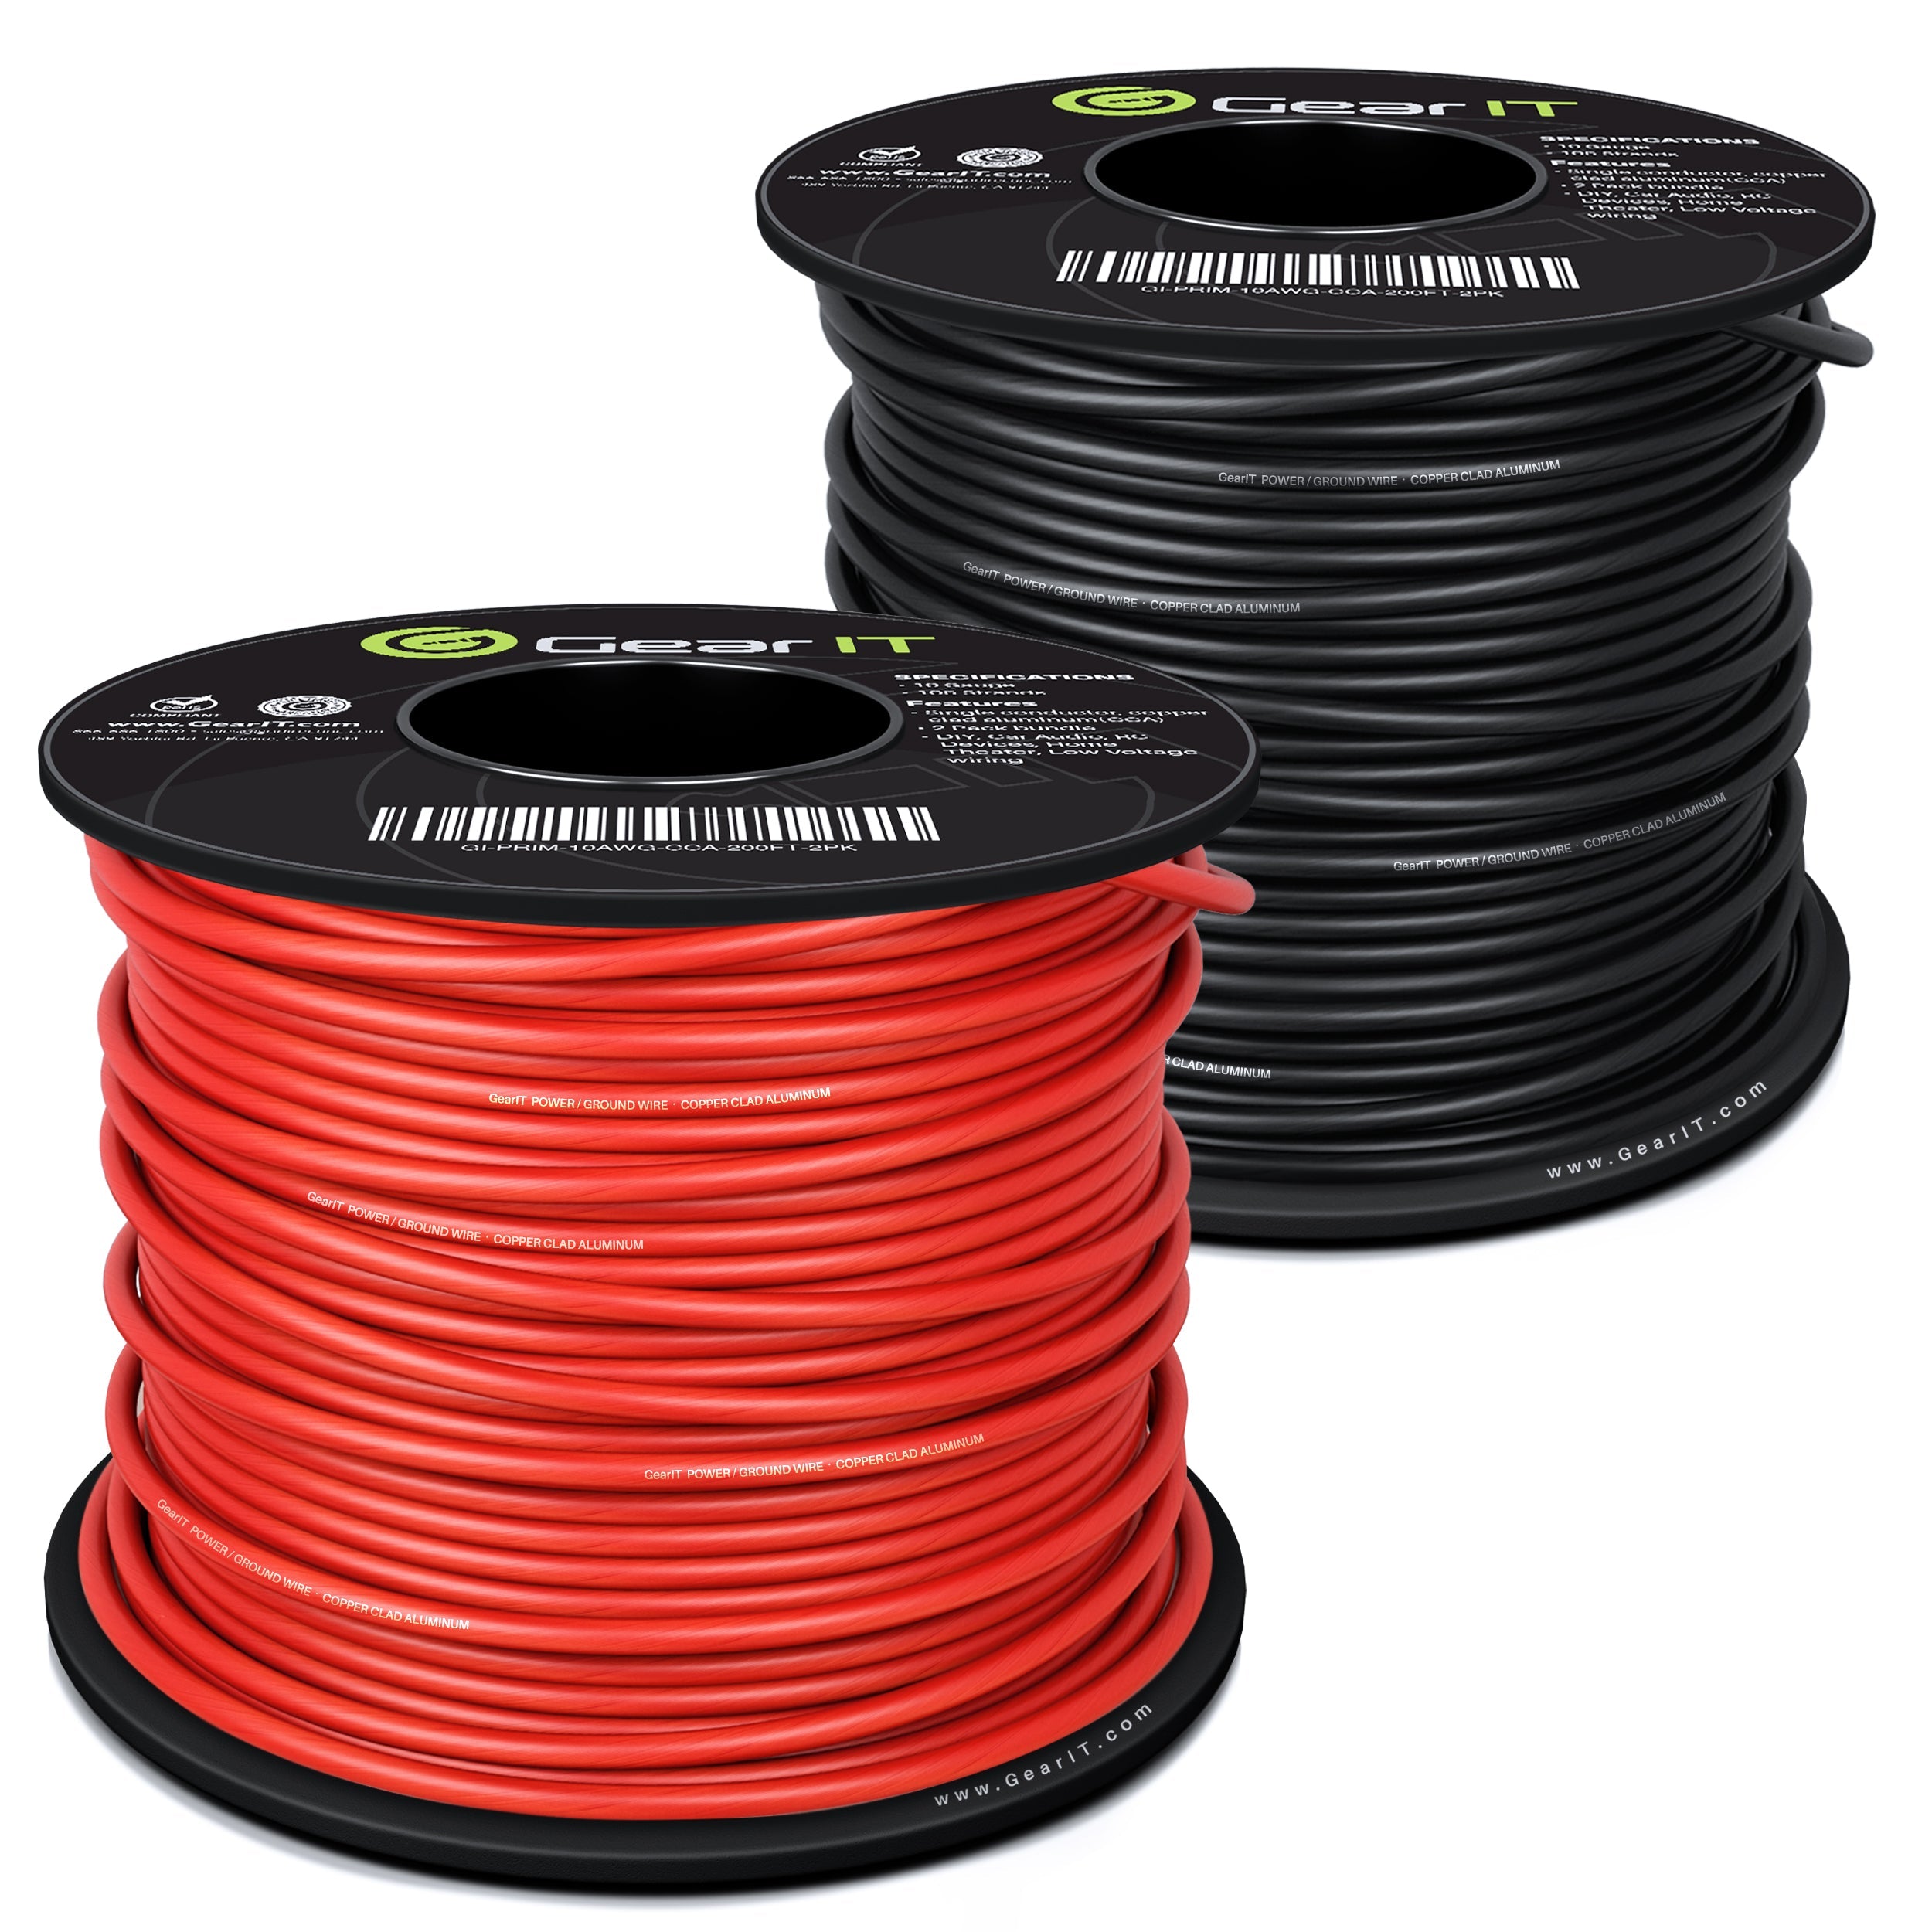 GearIT 12 Gauge Wire (50ft Each - Black/Red) Copper Clad Aluminum CCA - Primary Automotive Power/Ground for Battery Cable, Car Audio, Trailer